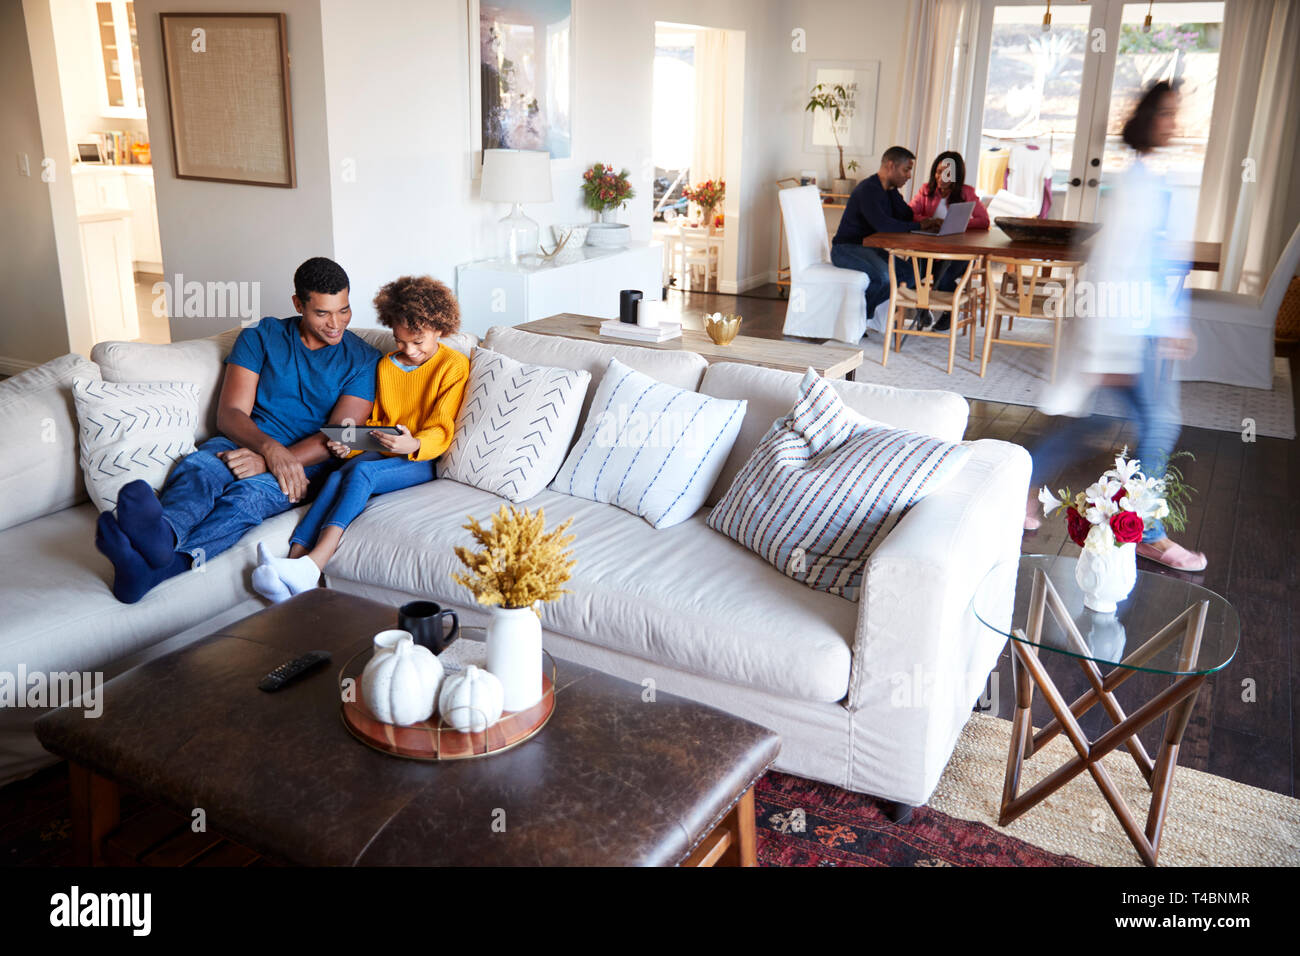 Three generation family family spending time in their open plan living room and kitchen diner, father and daughter in the foreground, elevated view, motion blur Stock Photo